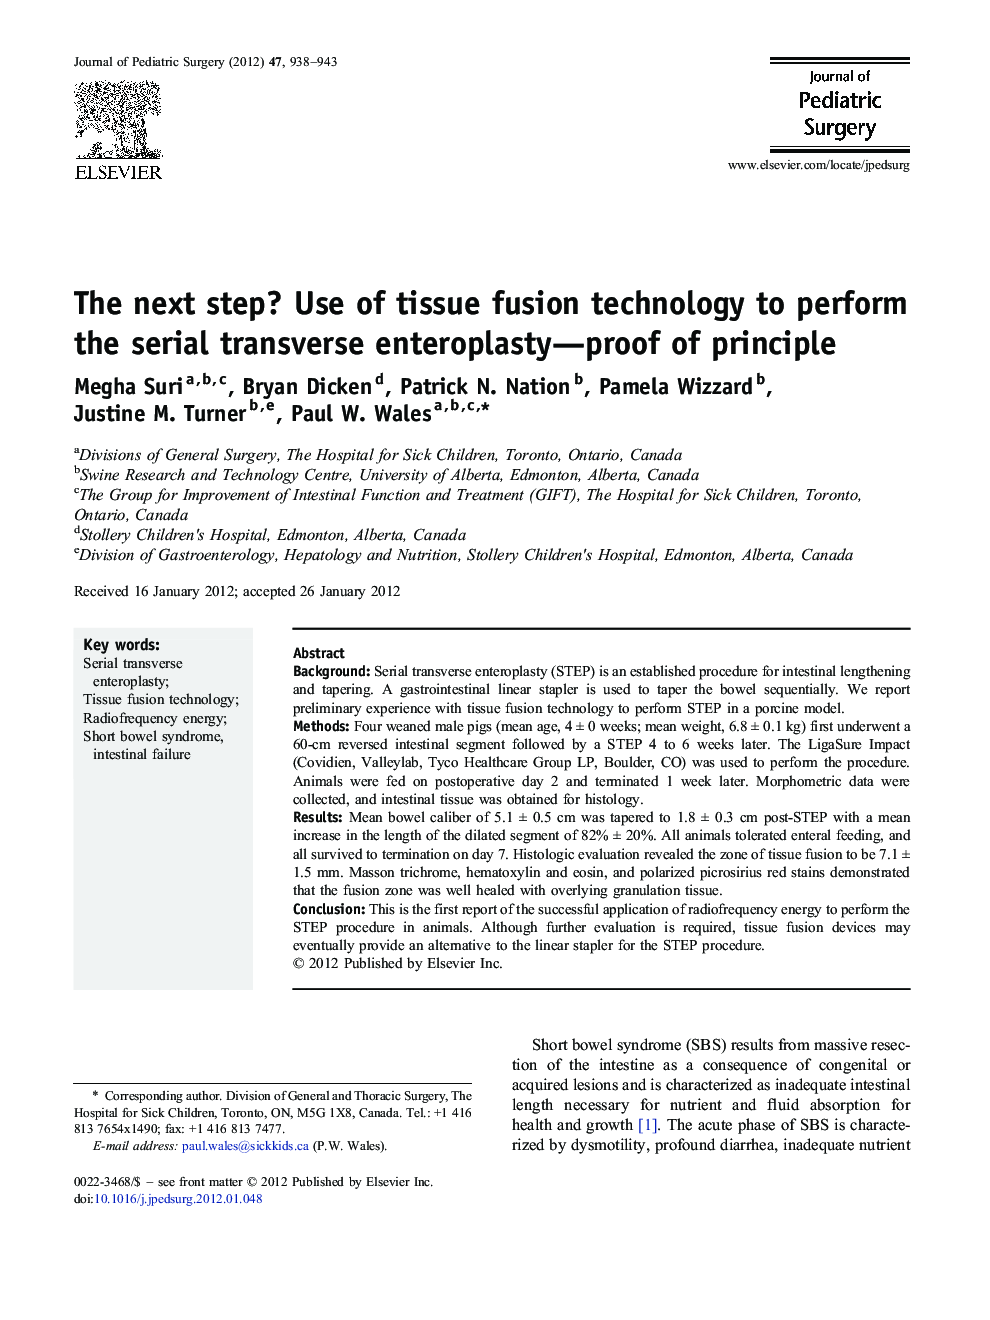 The next step? Use of tissue fusion technology to perform the serial transverse enteroplasty-proof of principle